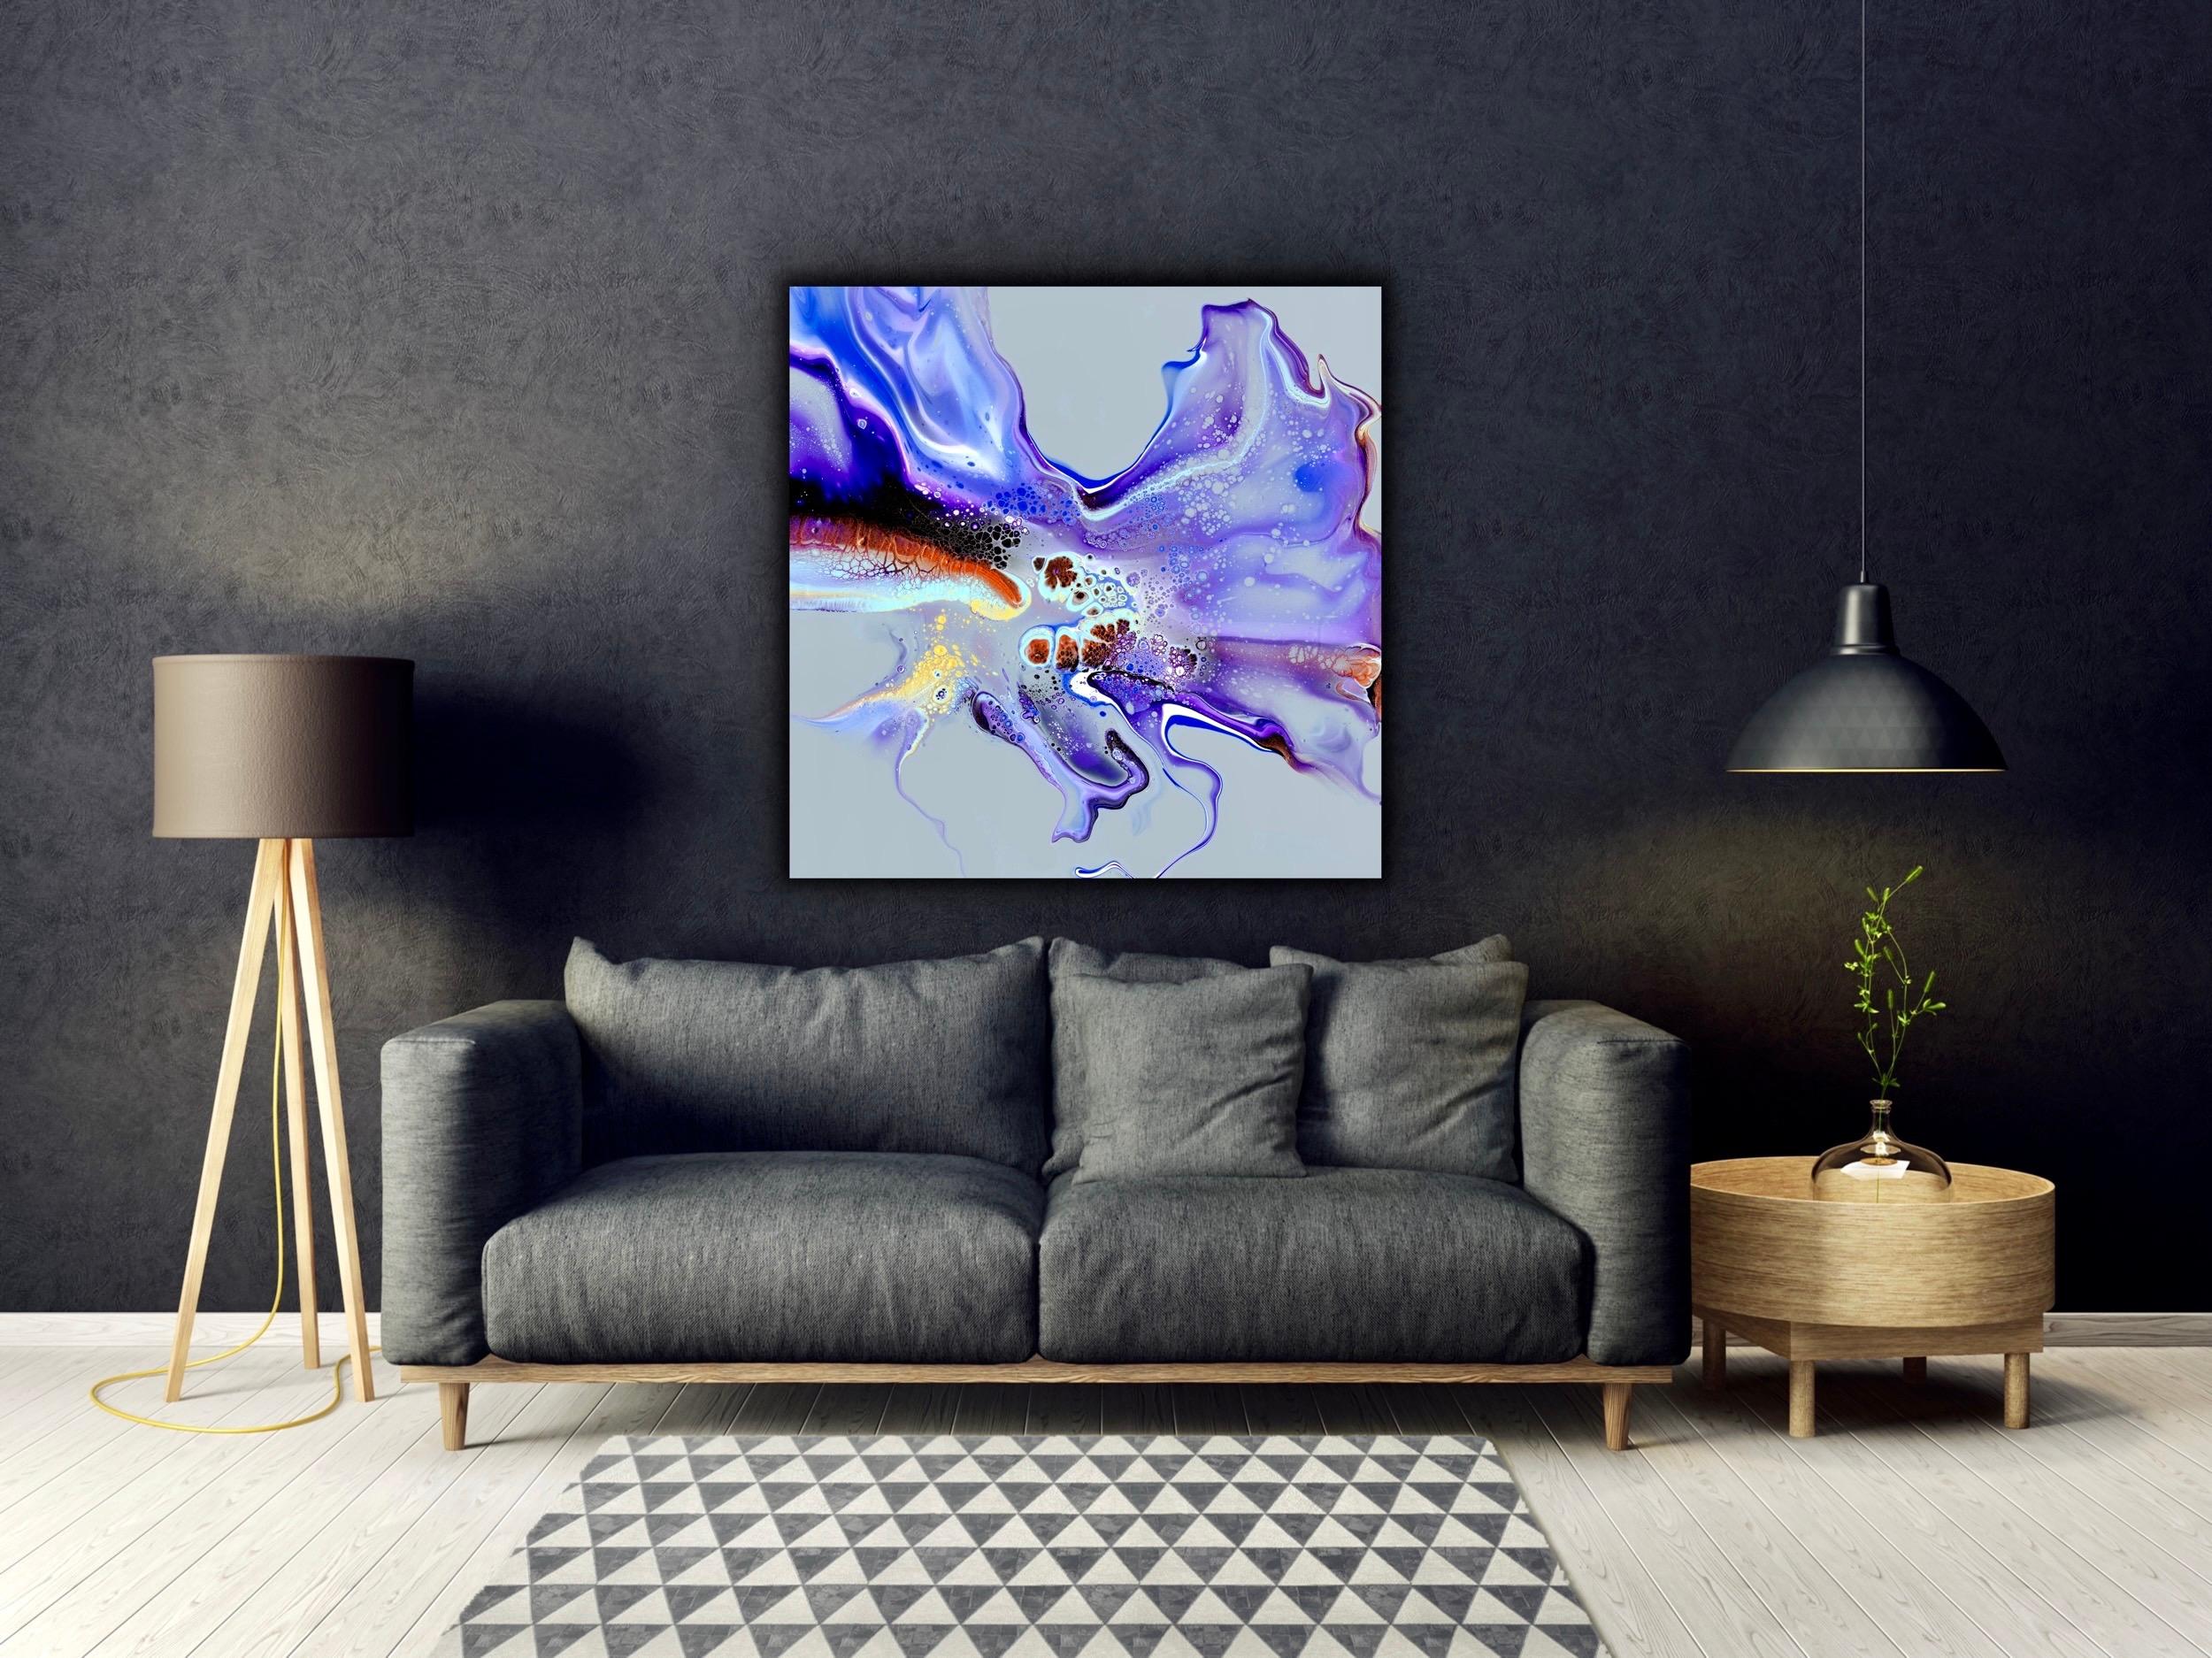 Modern Wall Art, Contemporary Decor, Large Indoor Outdoor Giclee Print on Metal - Painting by Celeste Reiter